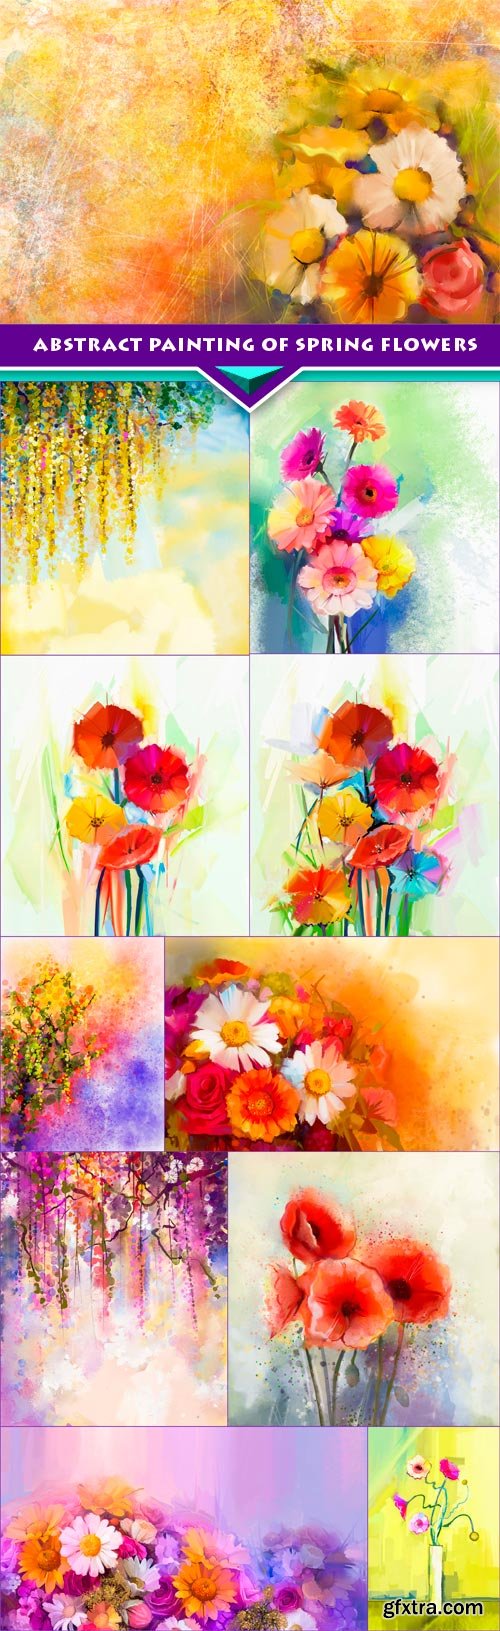 Abstract Painting of Spring Flowers Hand-Painted Still Life 11xJPG